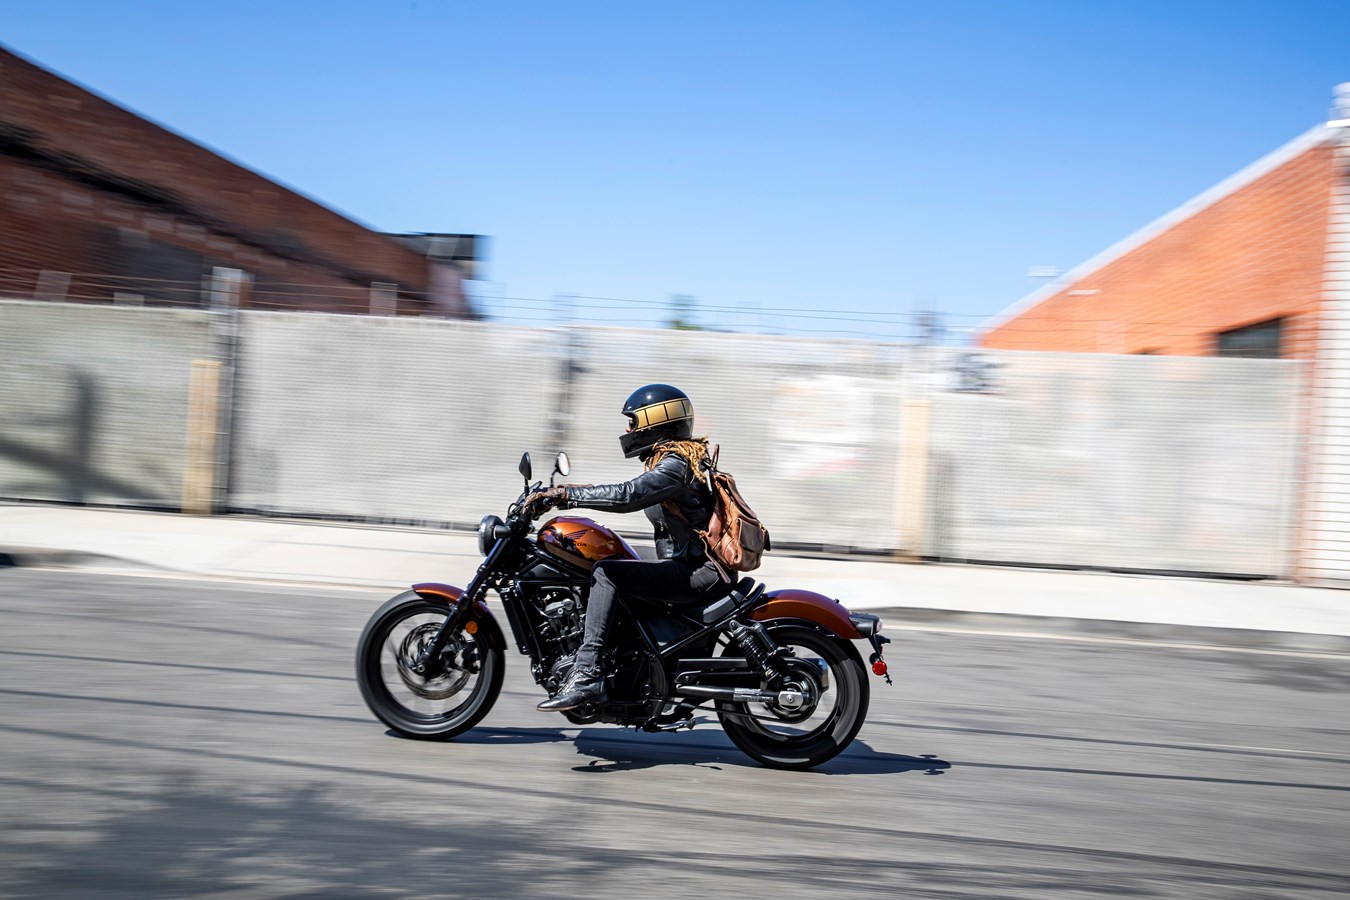 A lady riding down the street on a Honda Rebel